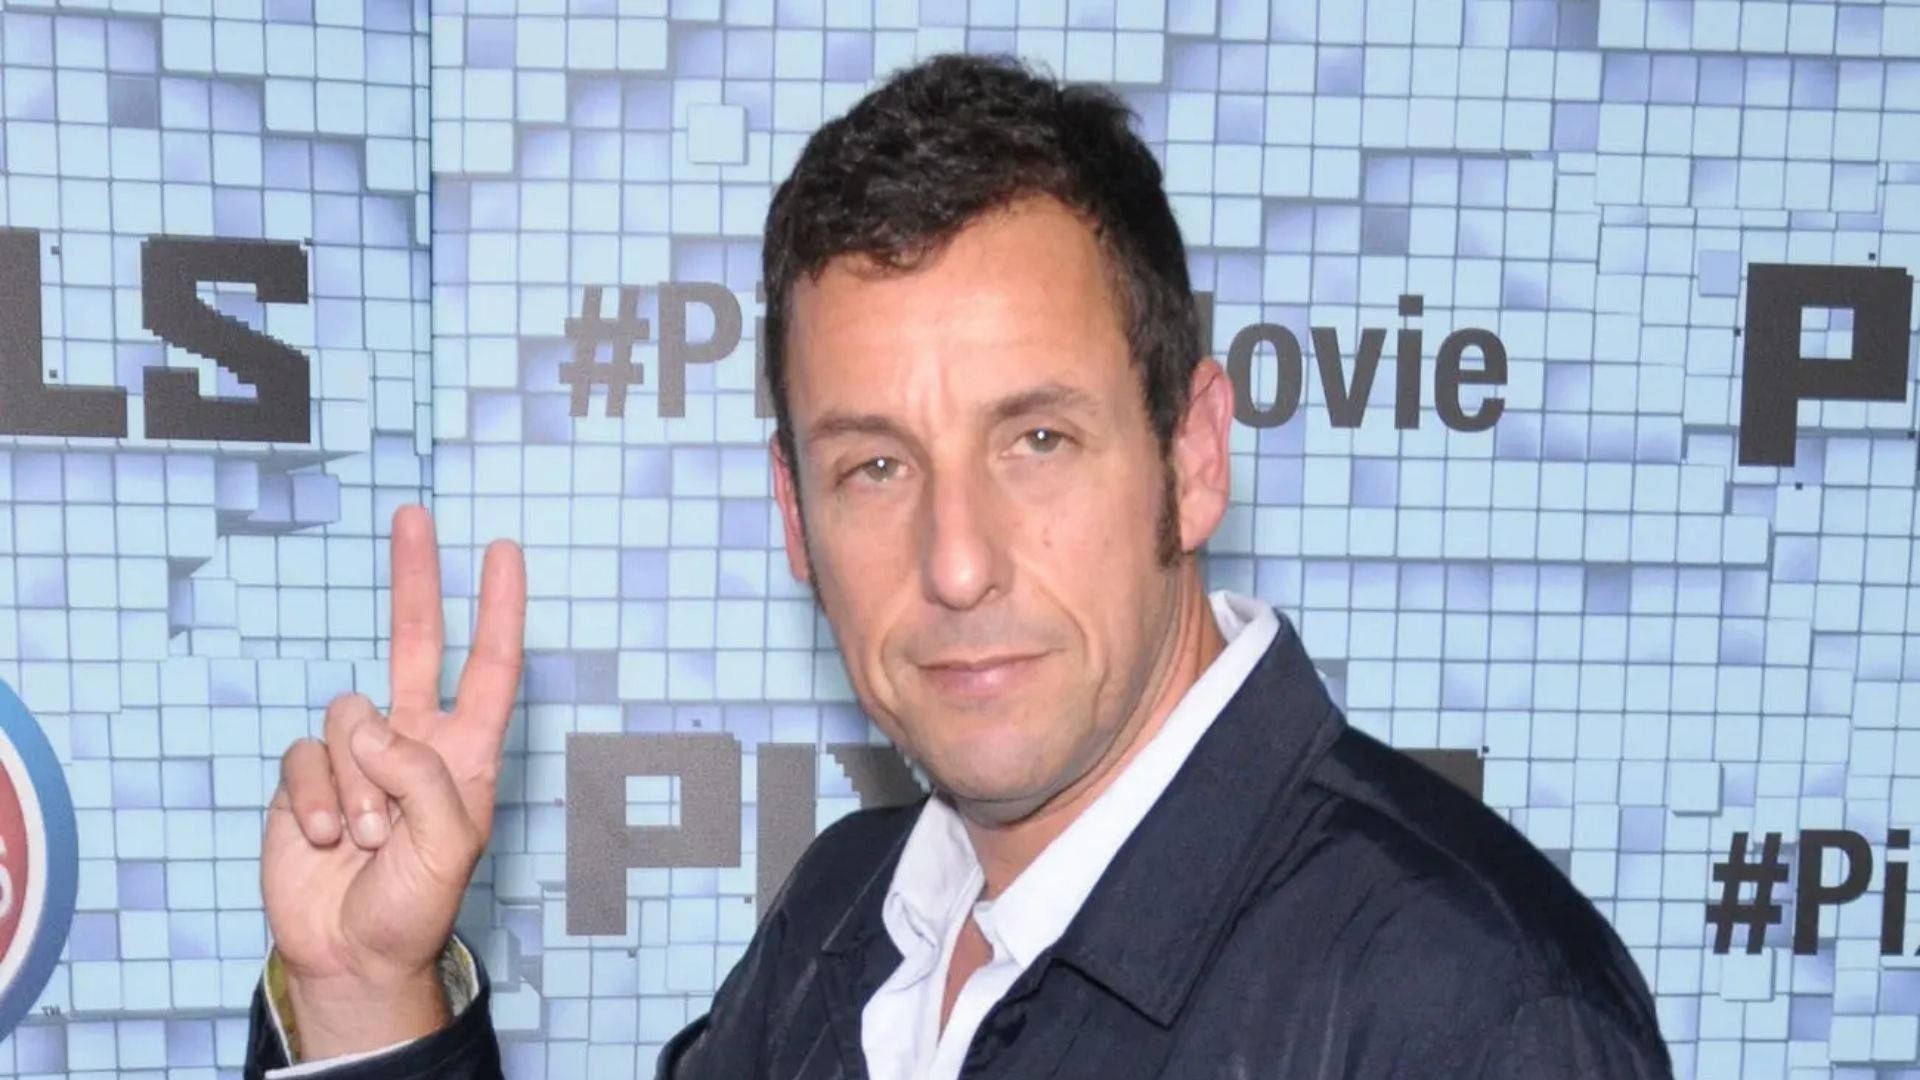 Caption: Adam Sandler Flashing A Peace Sign With A Charming Smile. Background